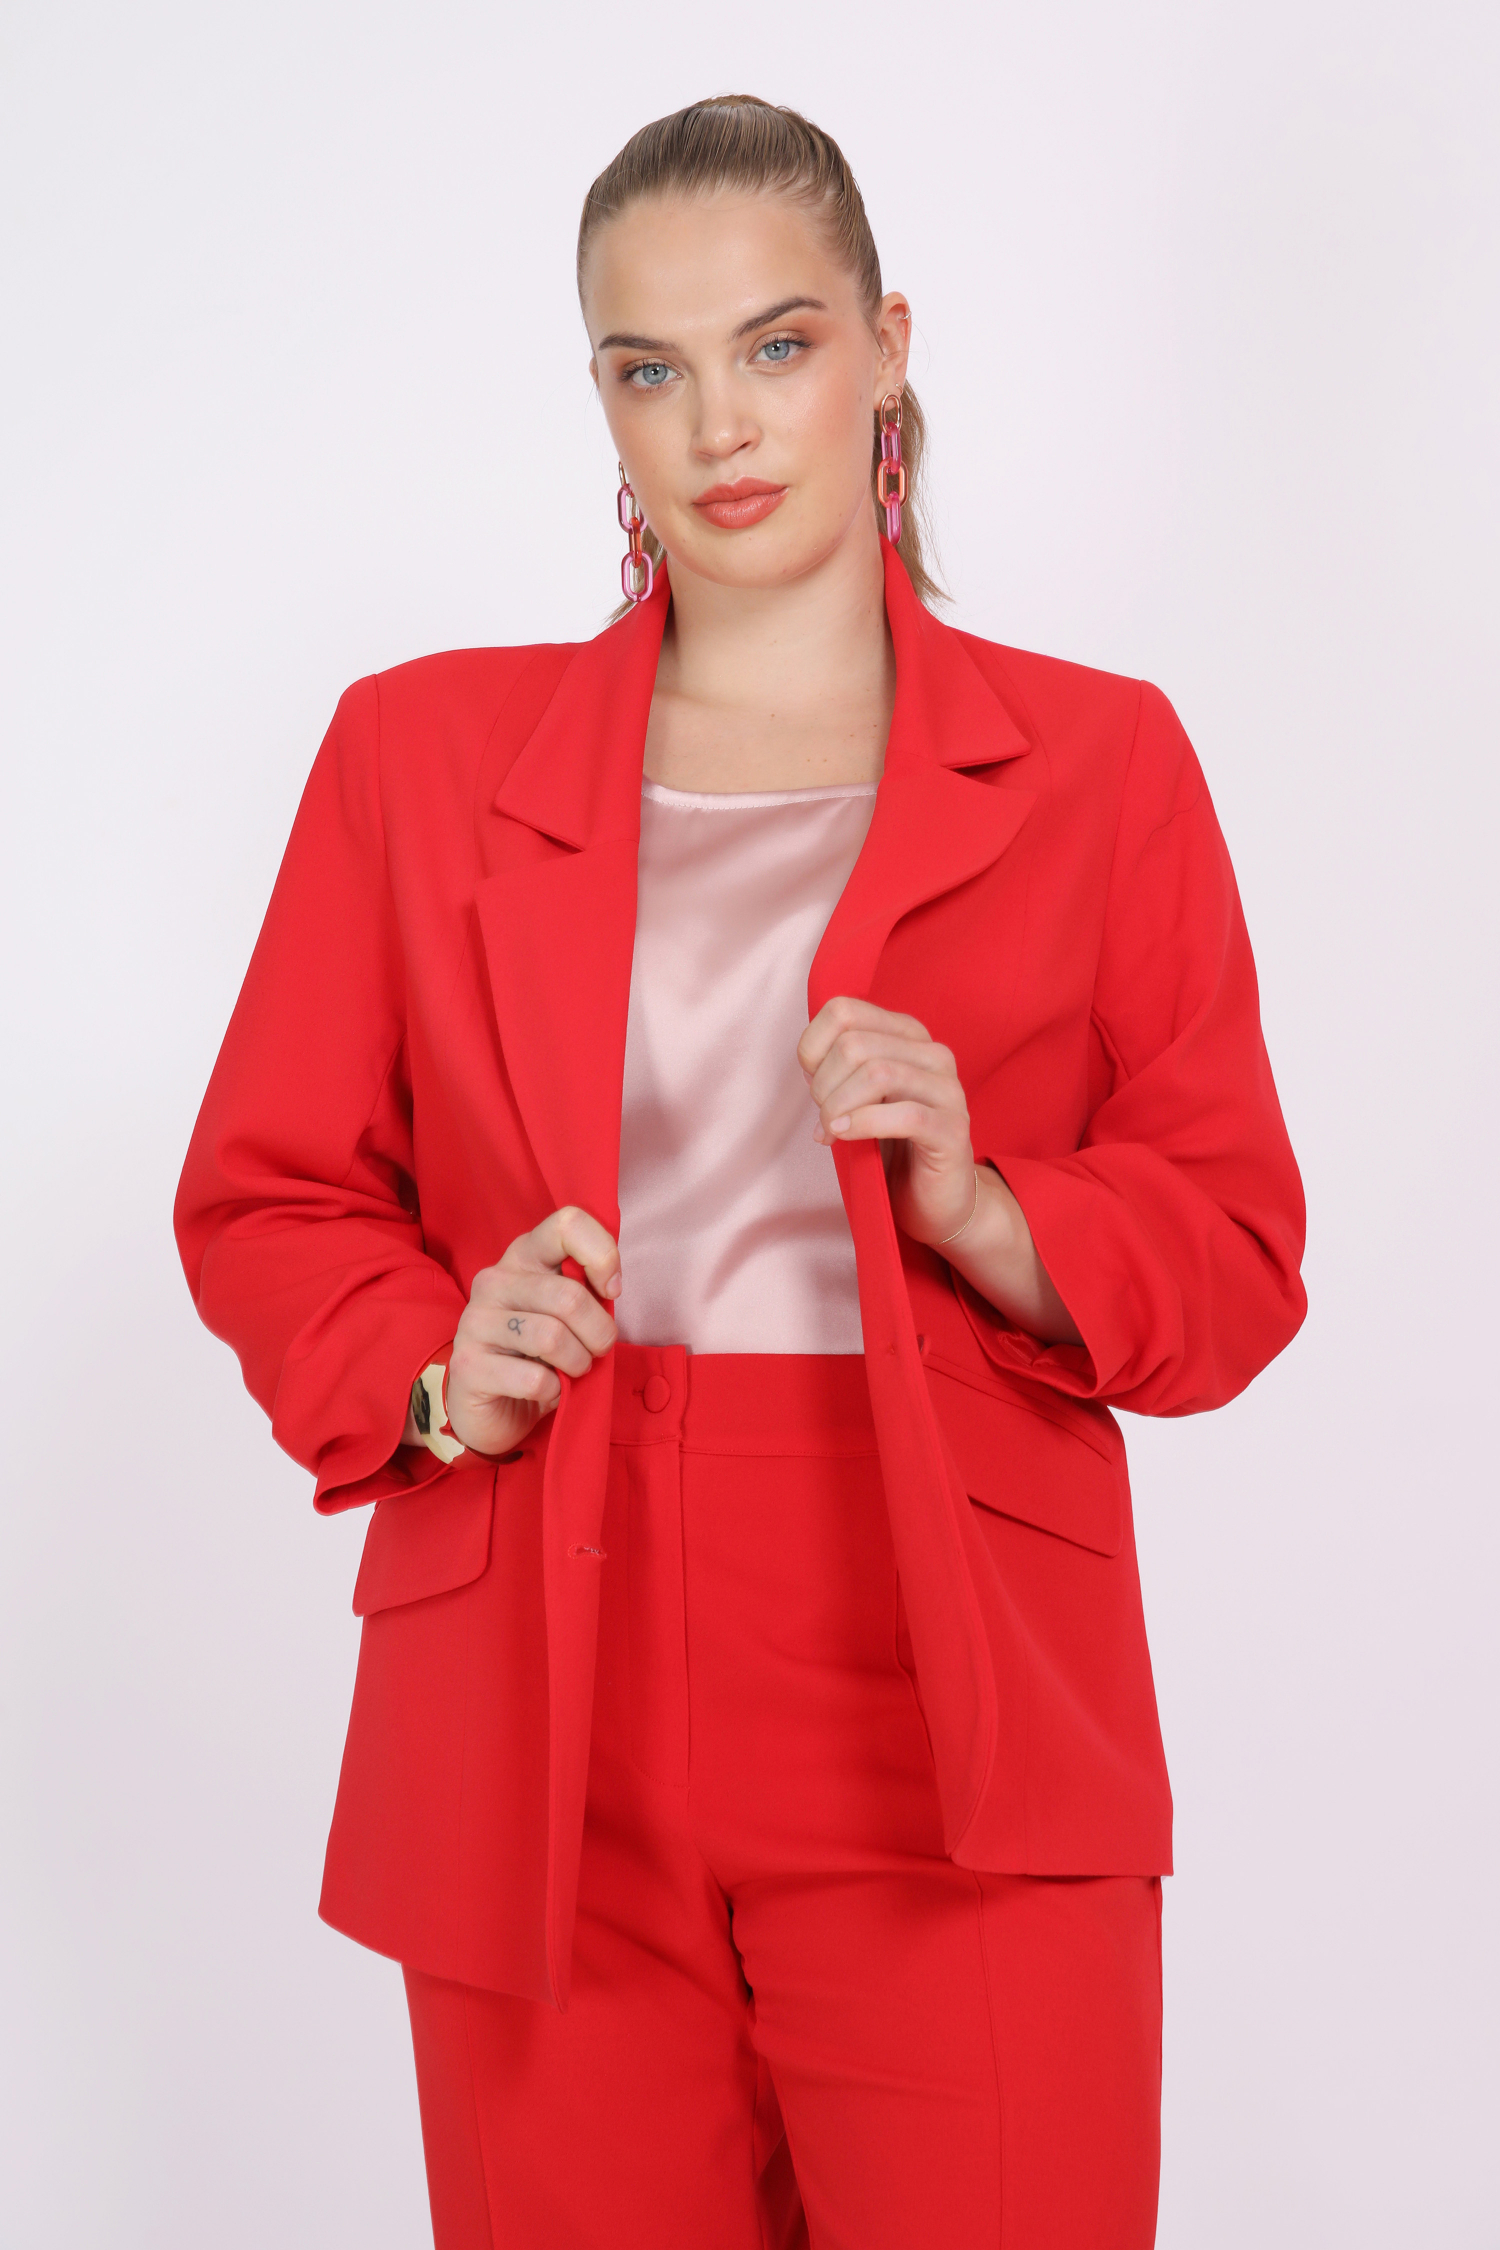 Plain suit jacket with buttoned effect sleeves